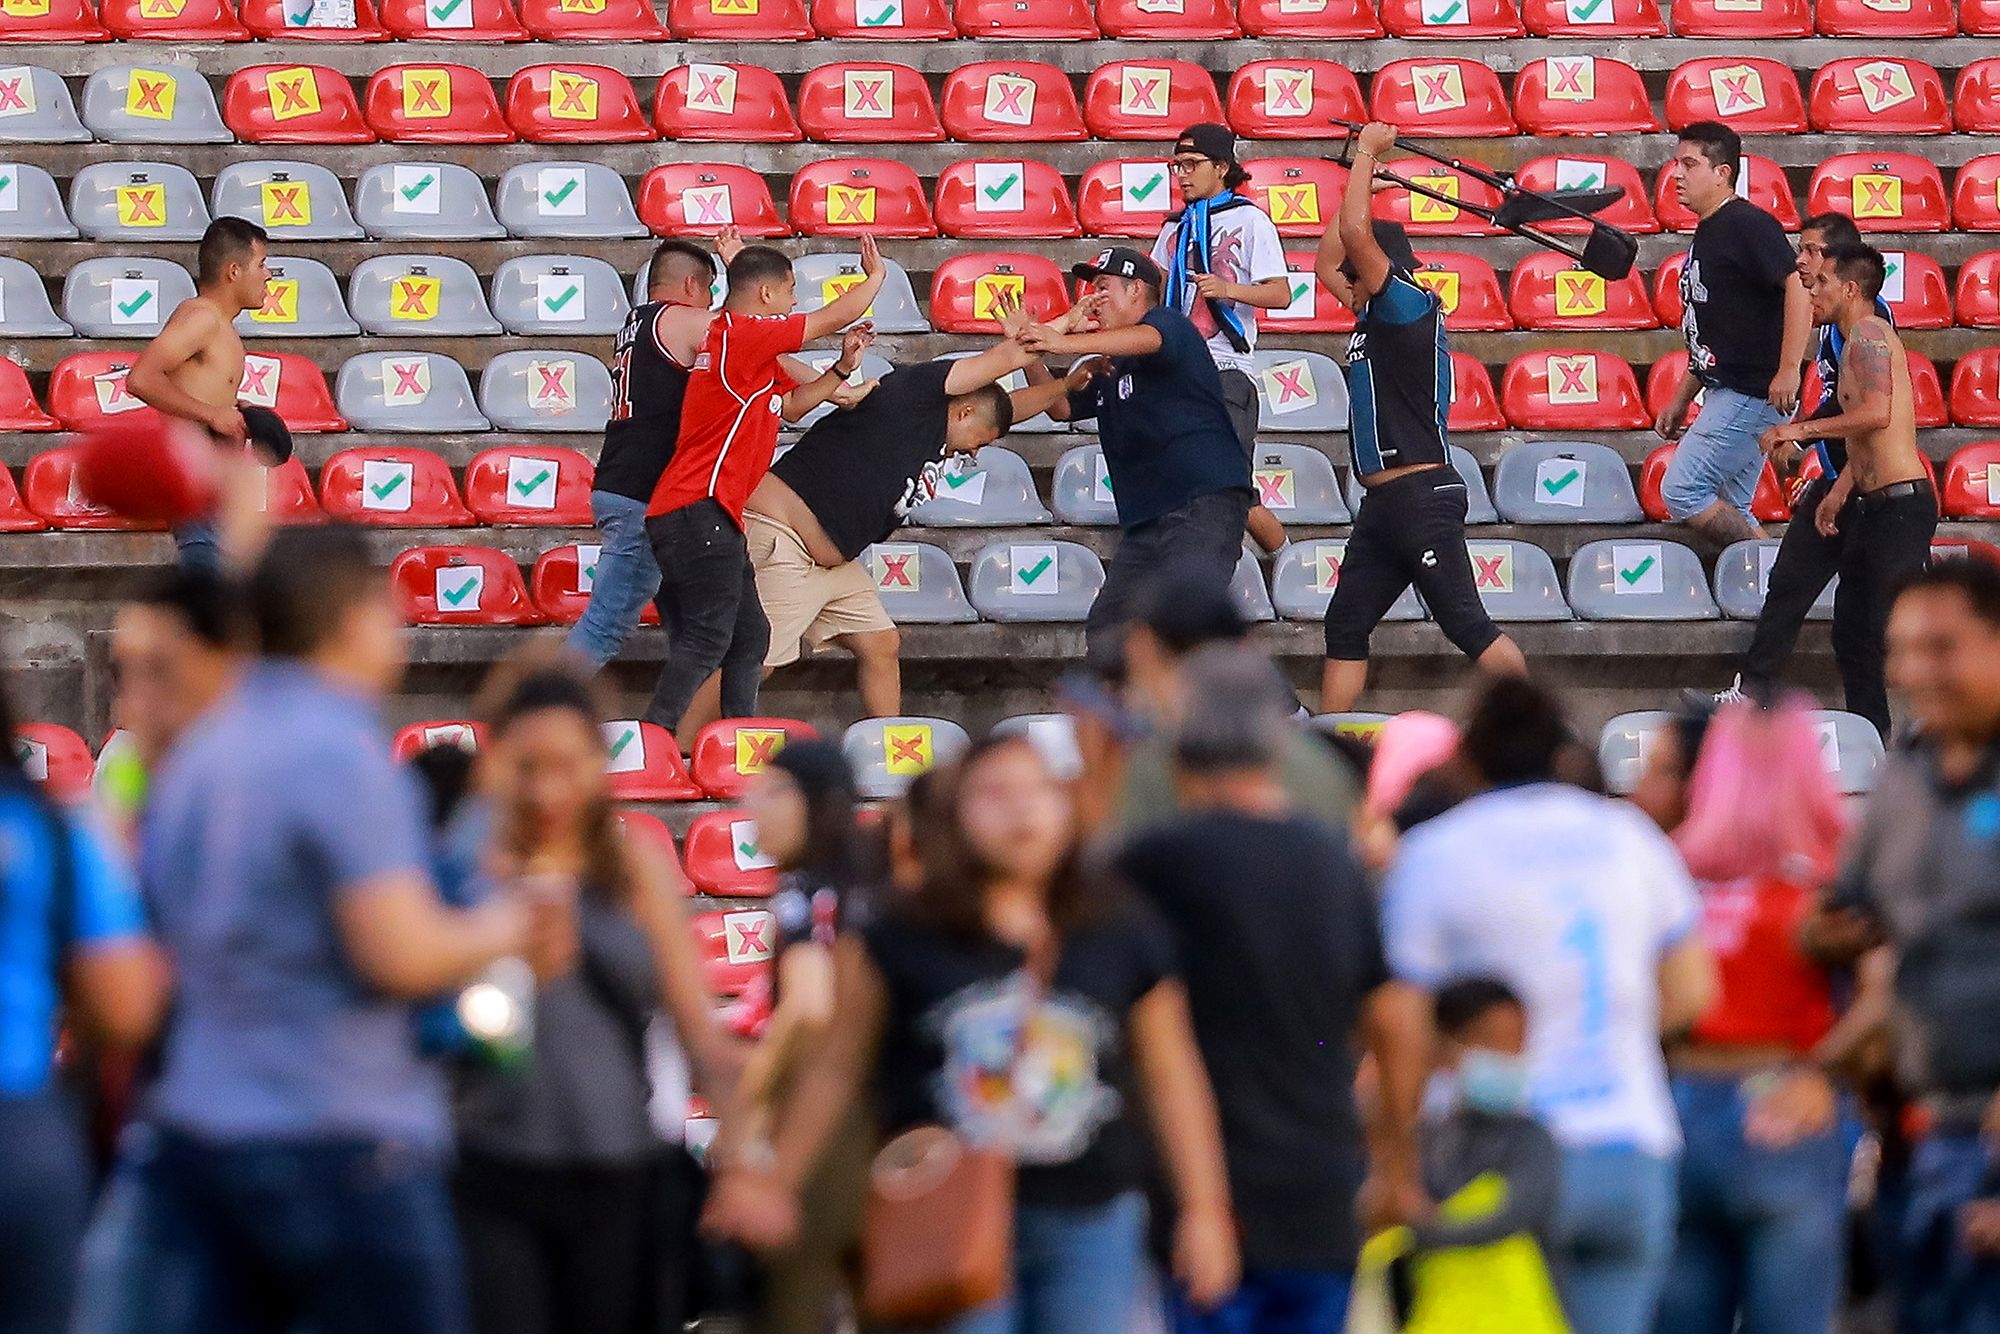 Fans brawl at Mexican soccer match leaves several in critical condition